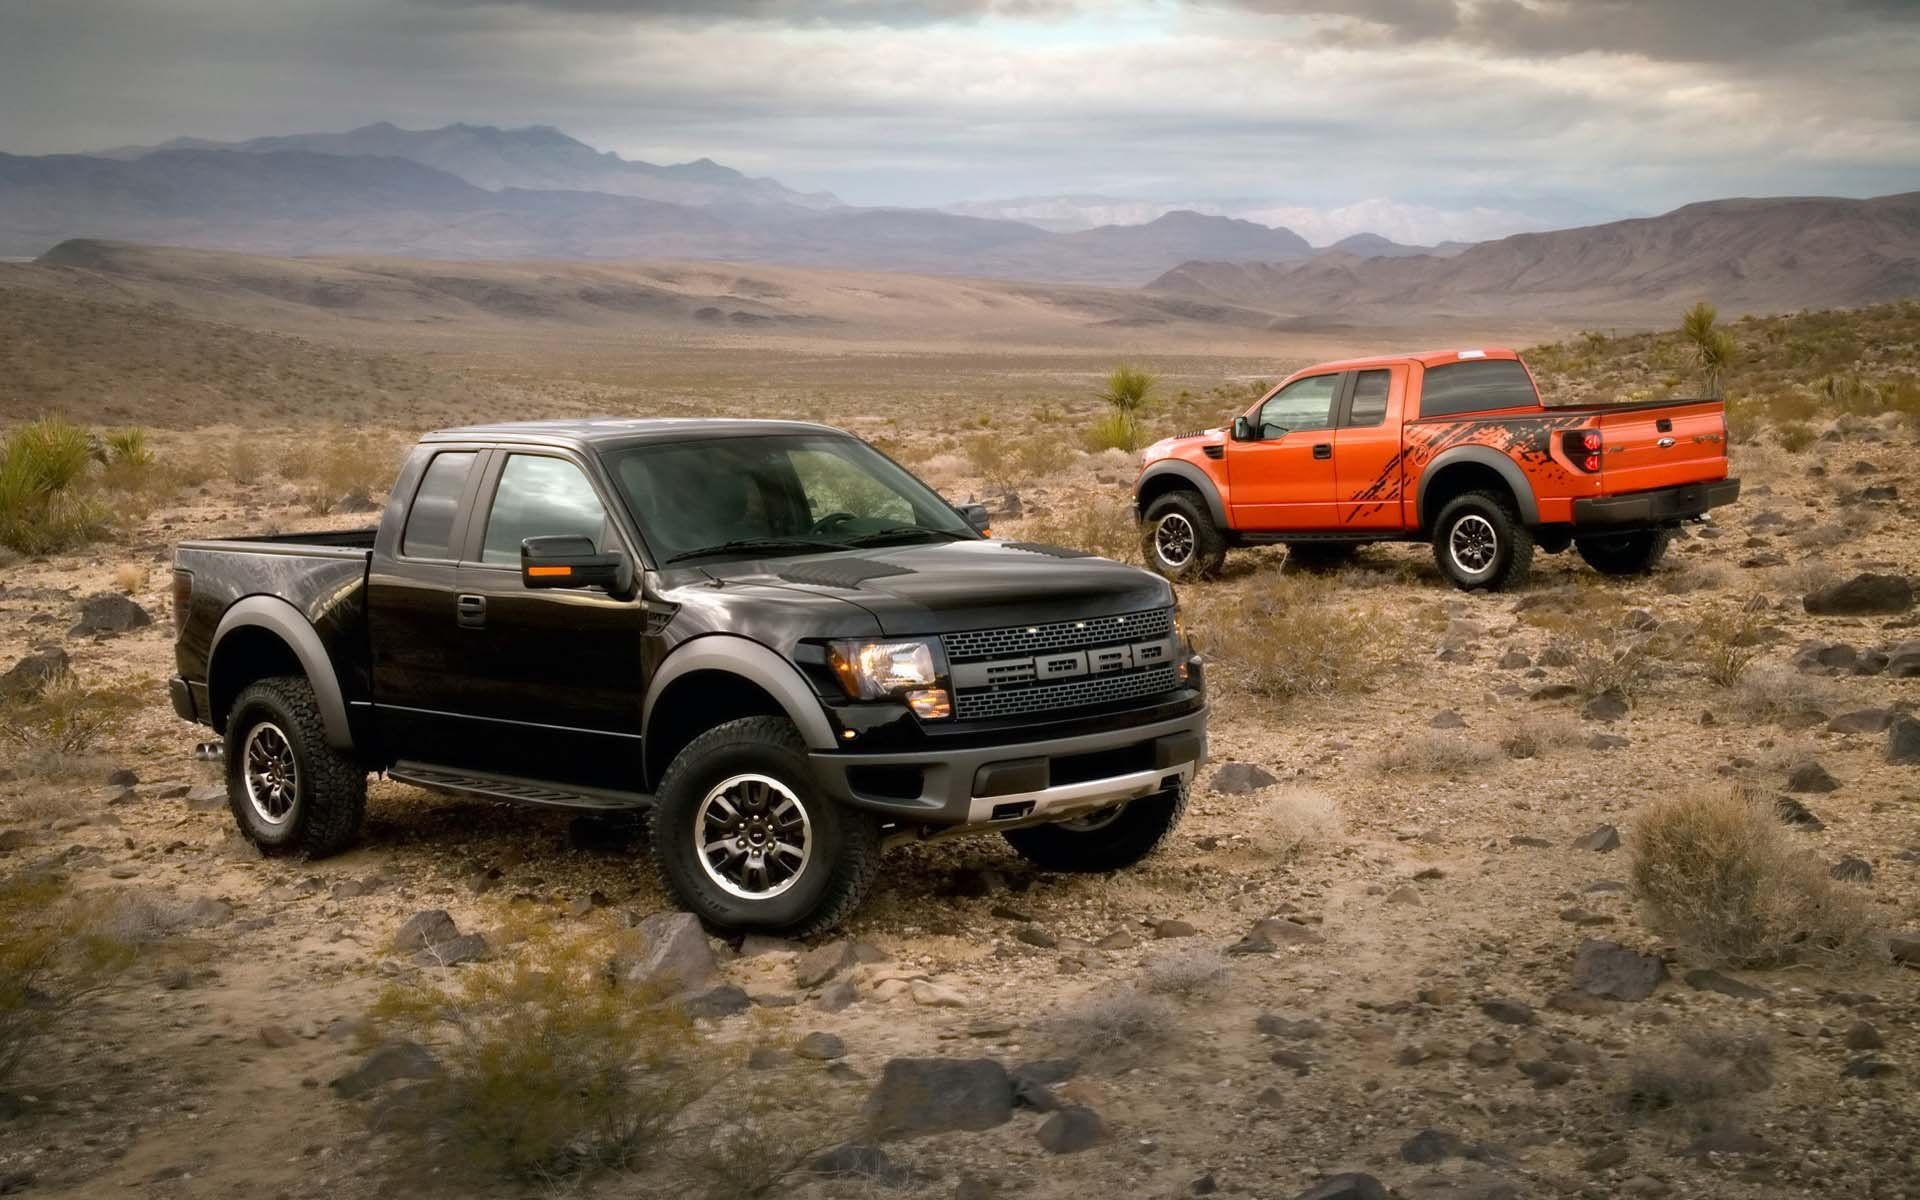 Ford Pickup Truck Widescreen HD Wallpaper Auto Cars